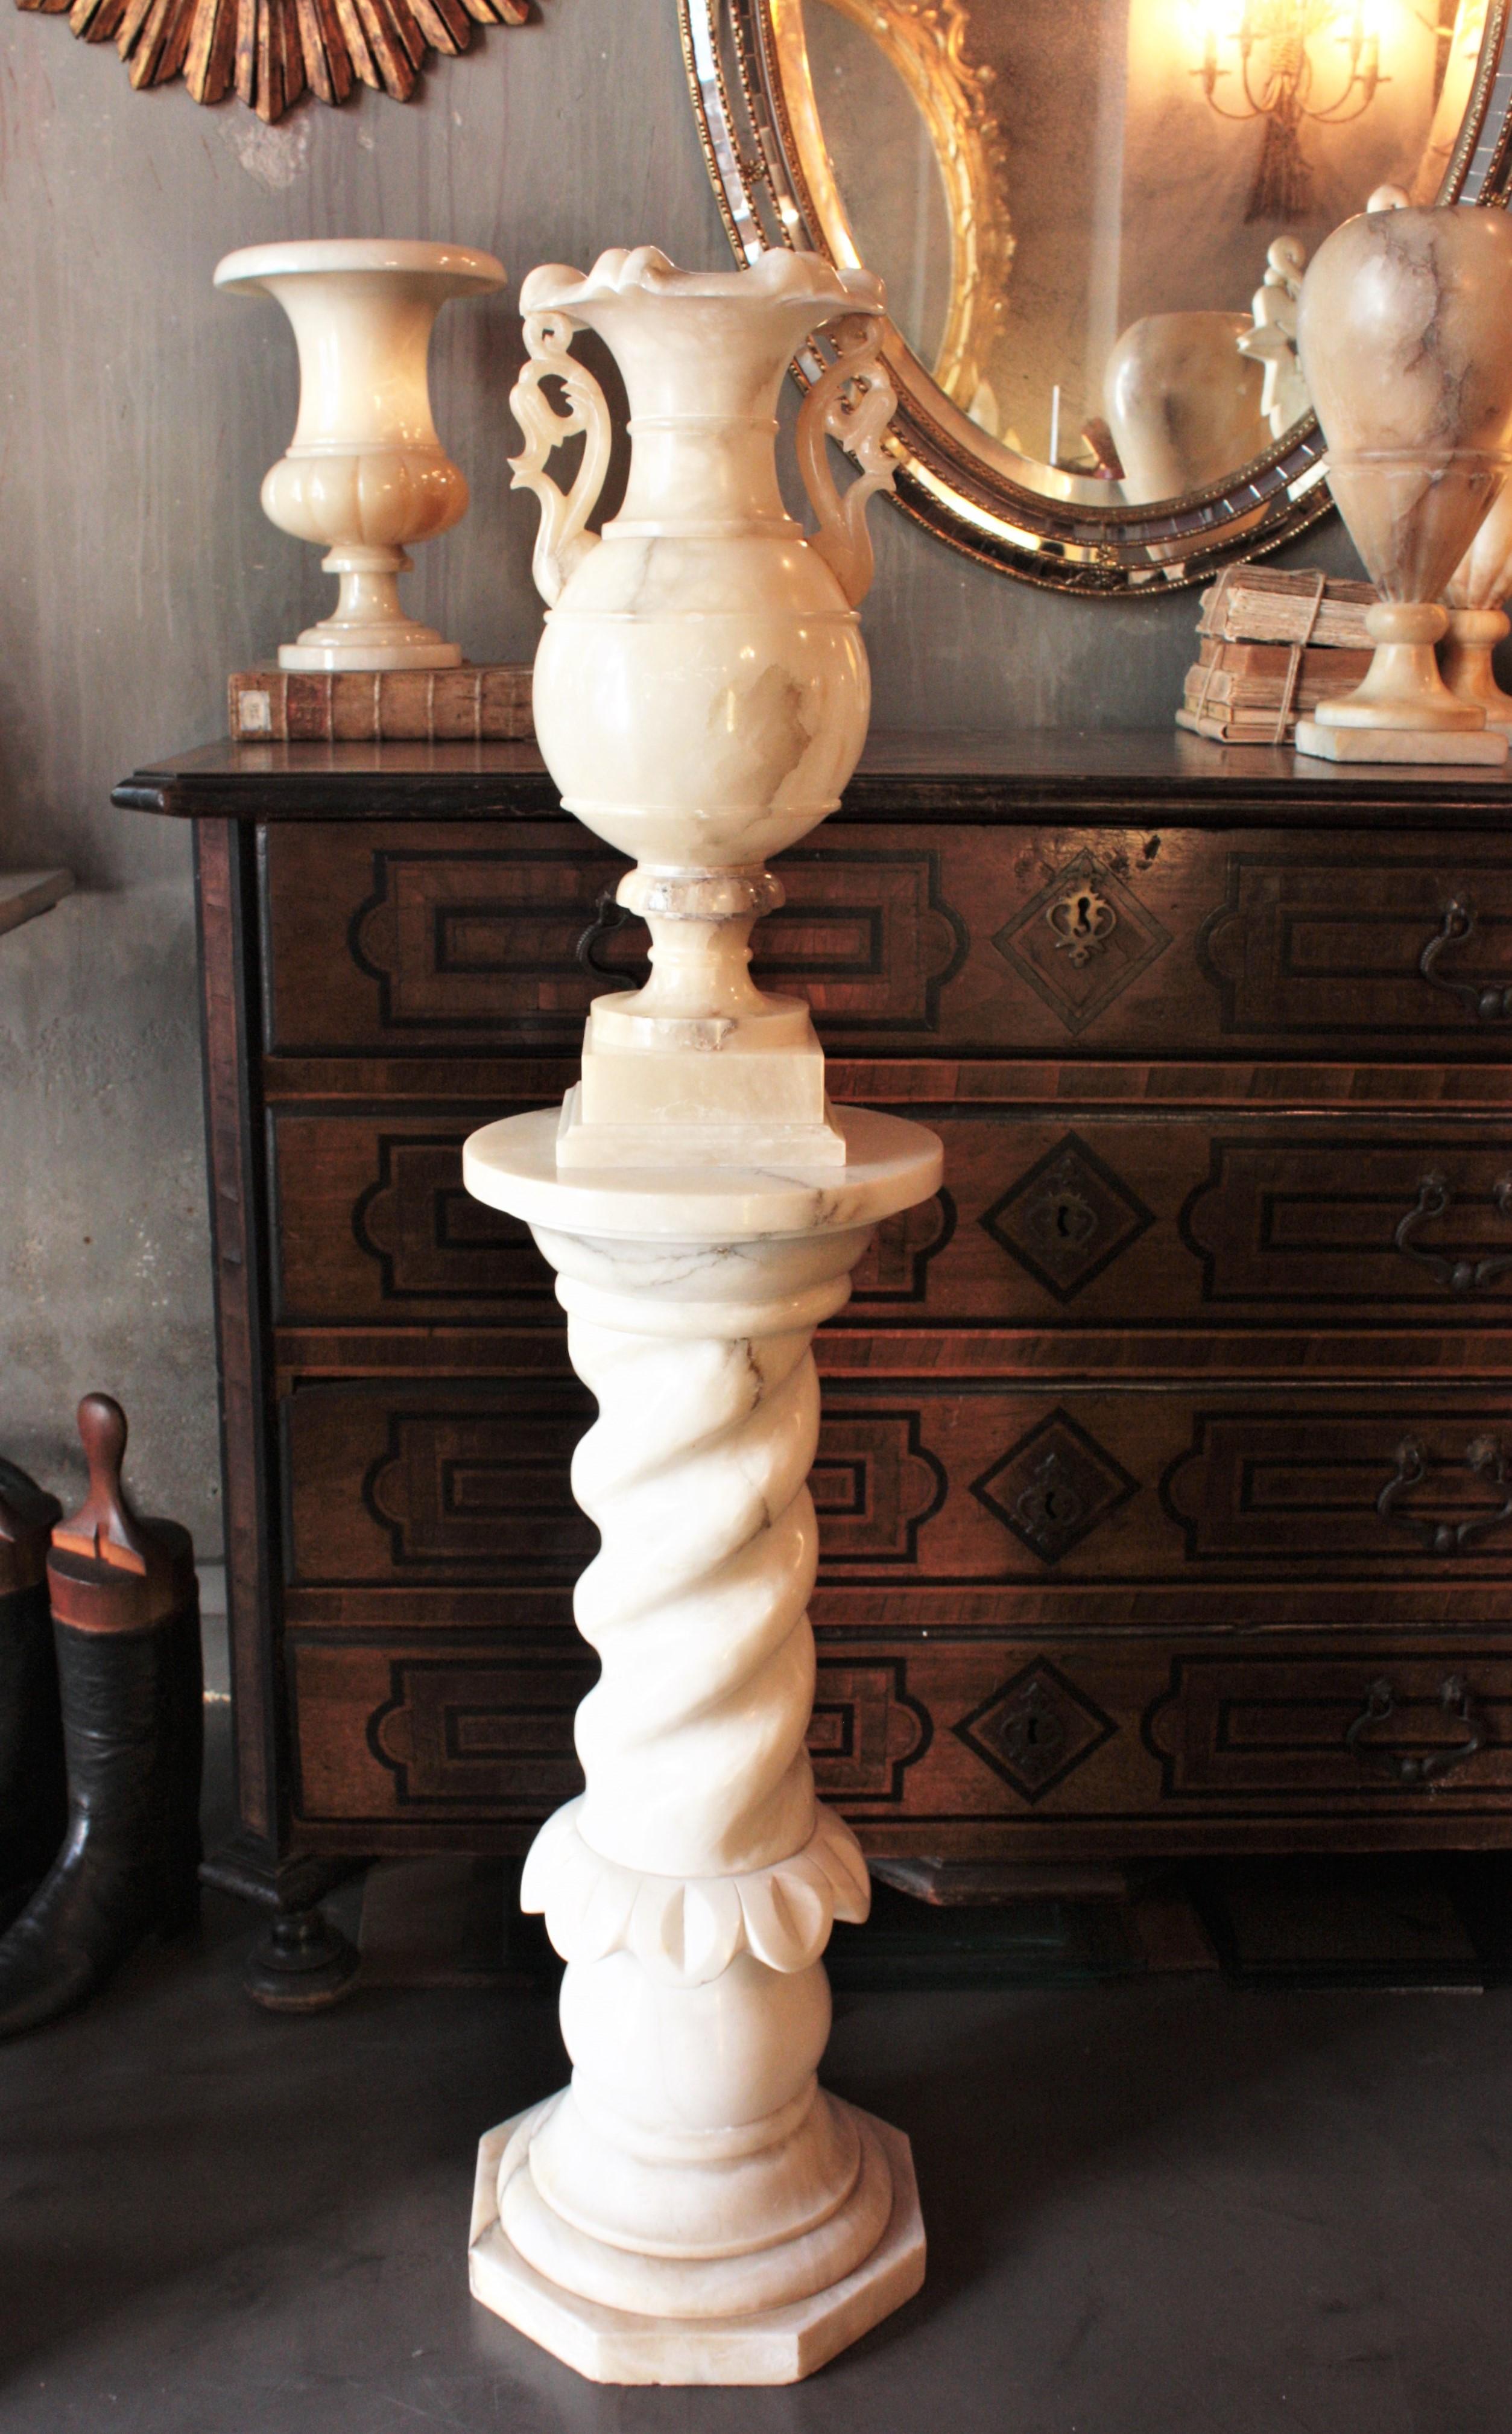 Carved Alabaster Floor Lamp.
Outstanding Neoclassical carved alabaster urn lamp with handles on column pedestal stand, Spain, 1930s-1940s
This alabaster floor lamp has an elegant neoclassical design. The Urn urplighter lamp stands has beautiful